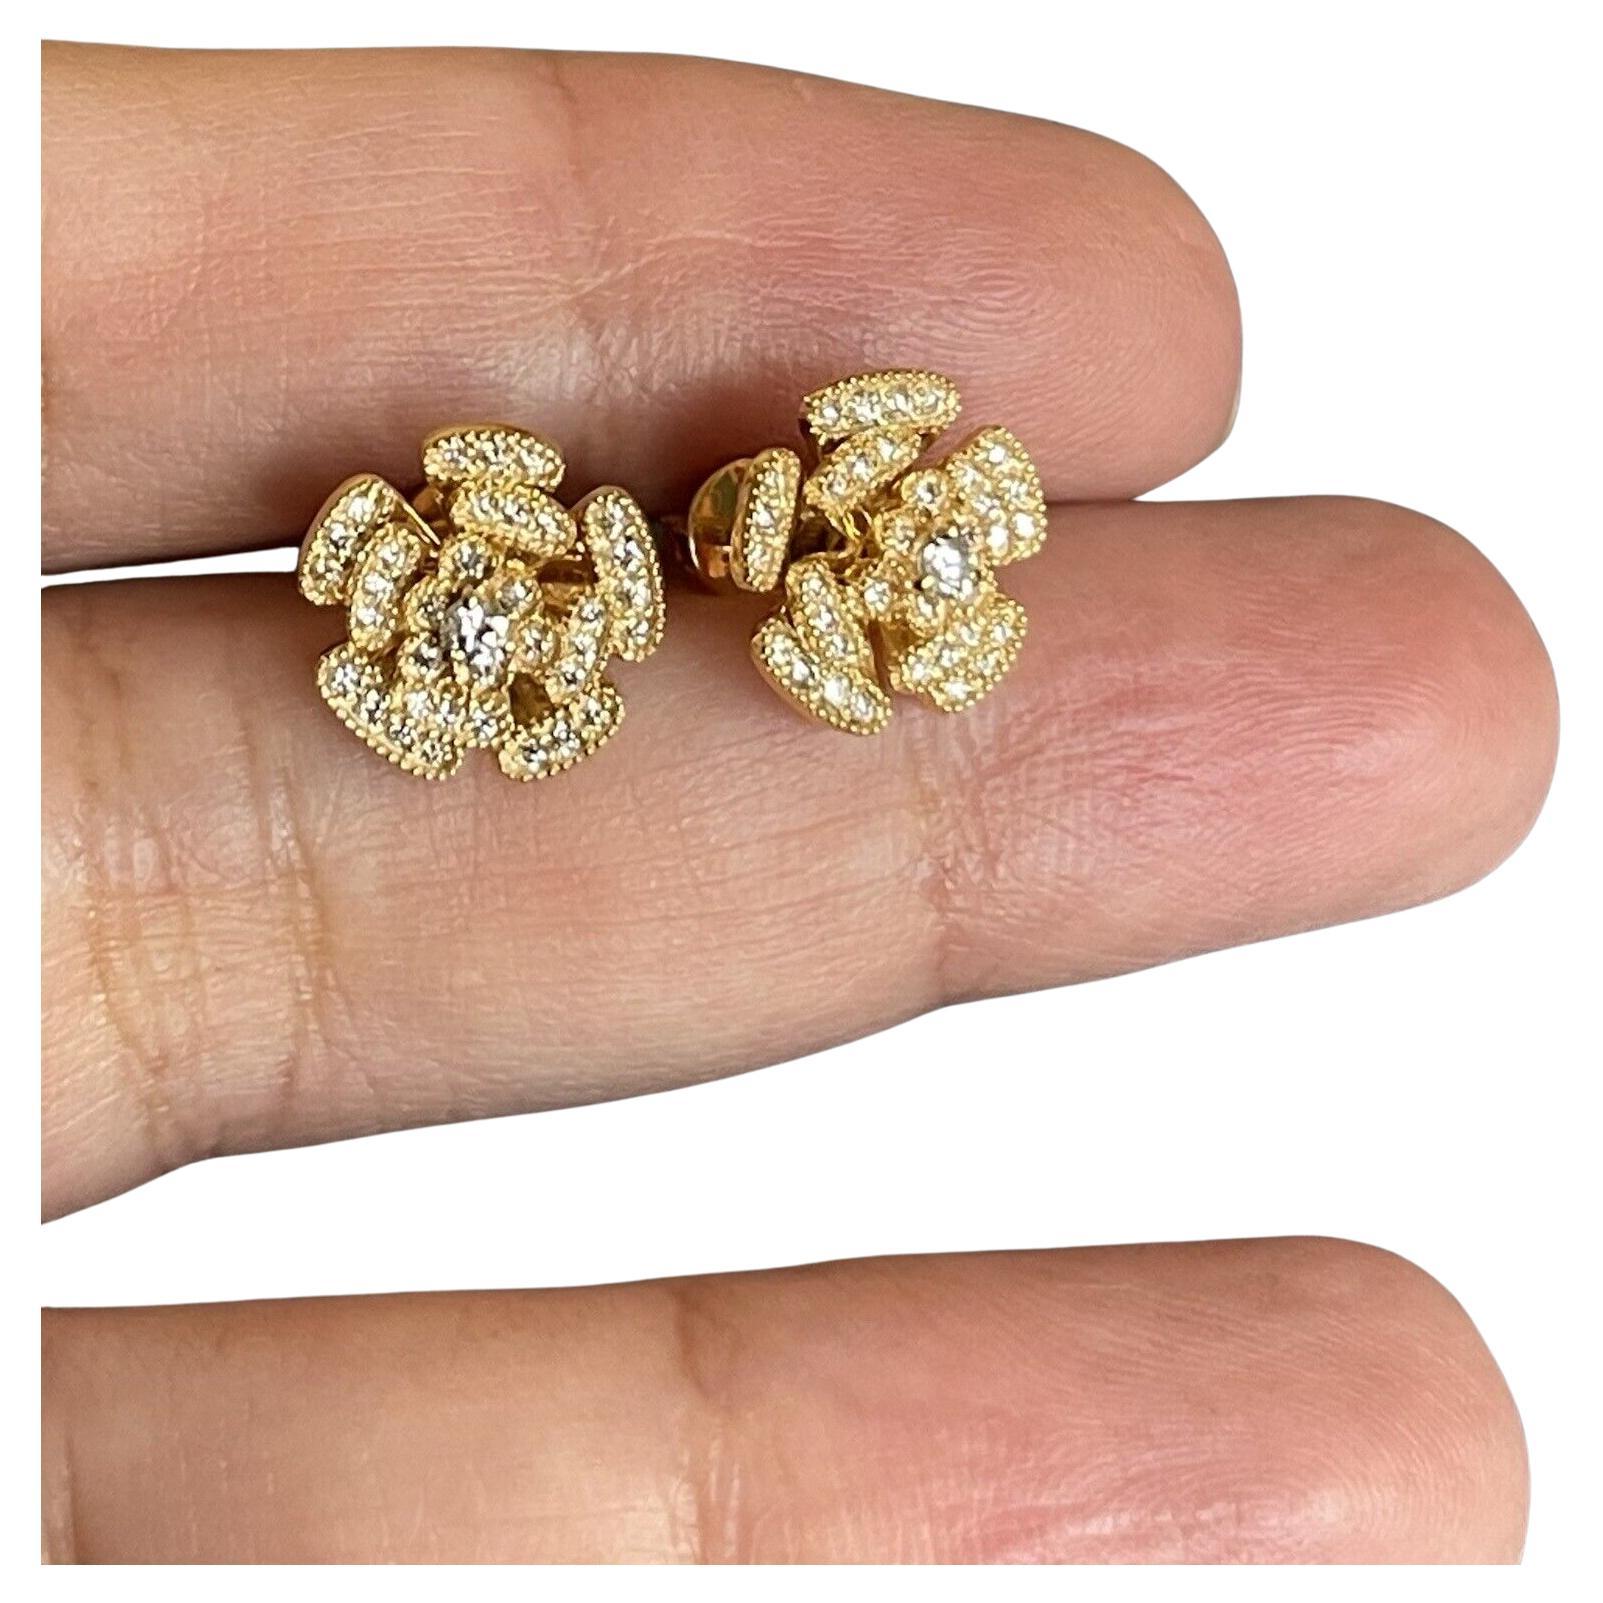 Cervin Blanc 18ct Yellow Gold Diamond Earrings 0.50ct Alpine Rose Studs VS For Sale